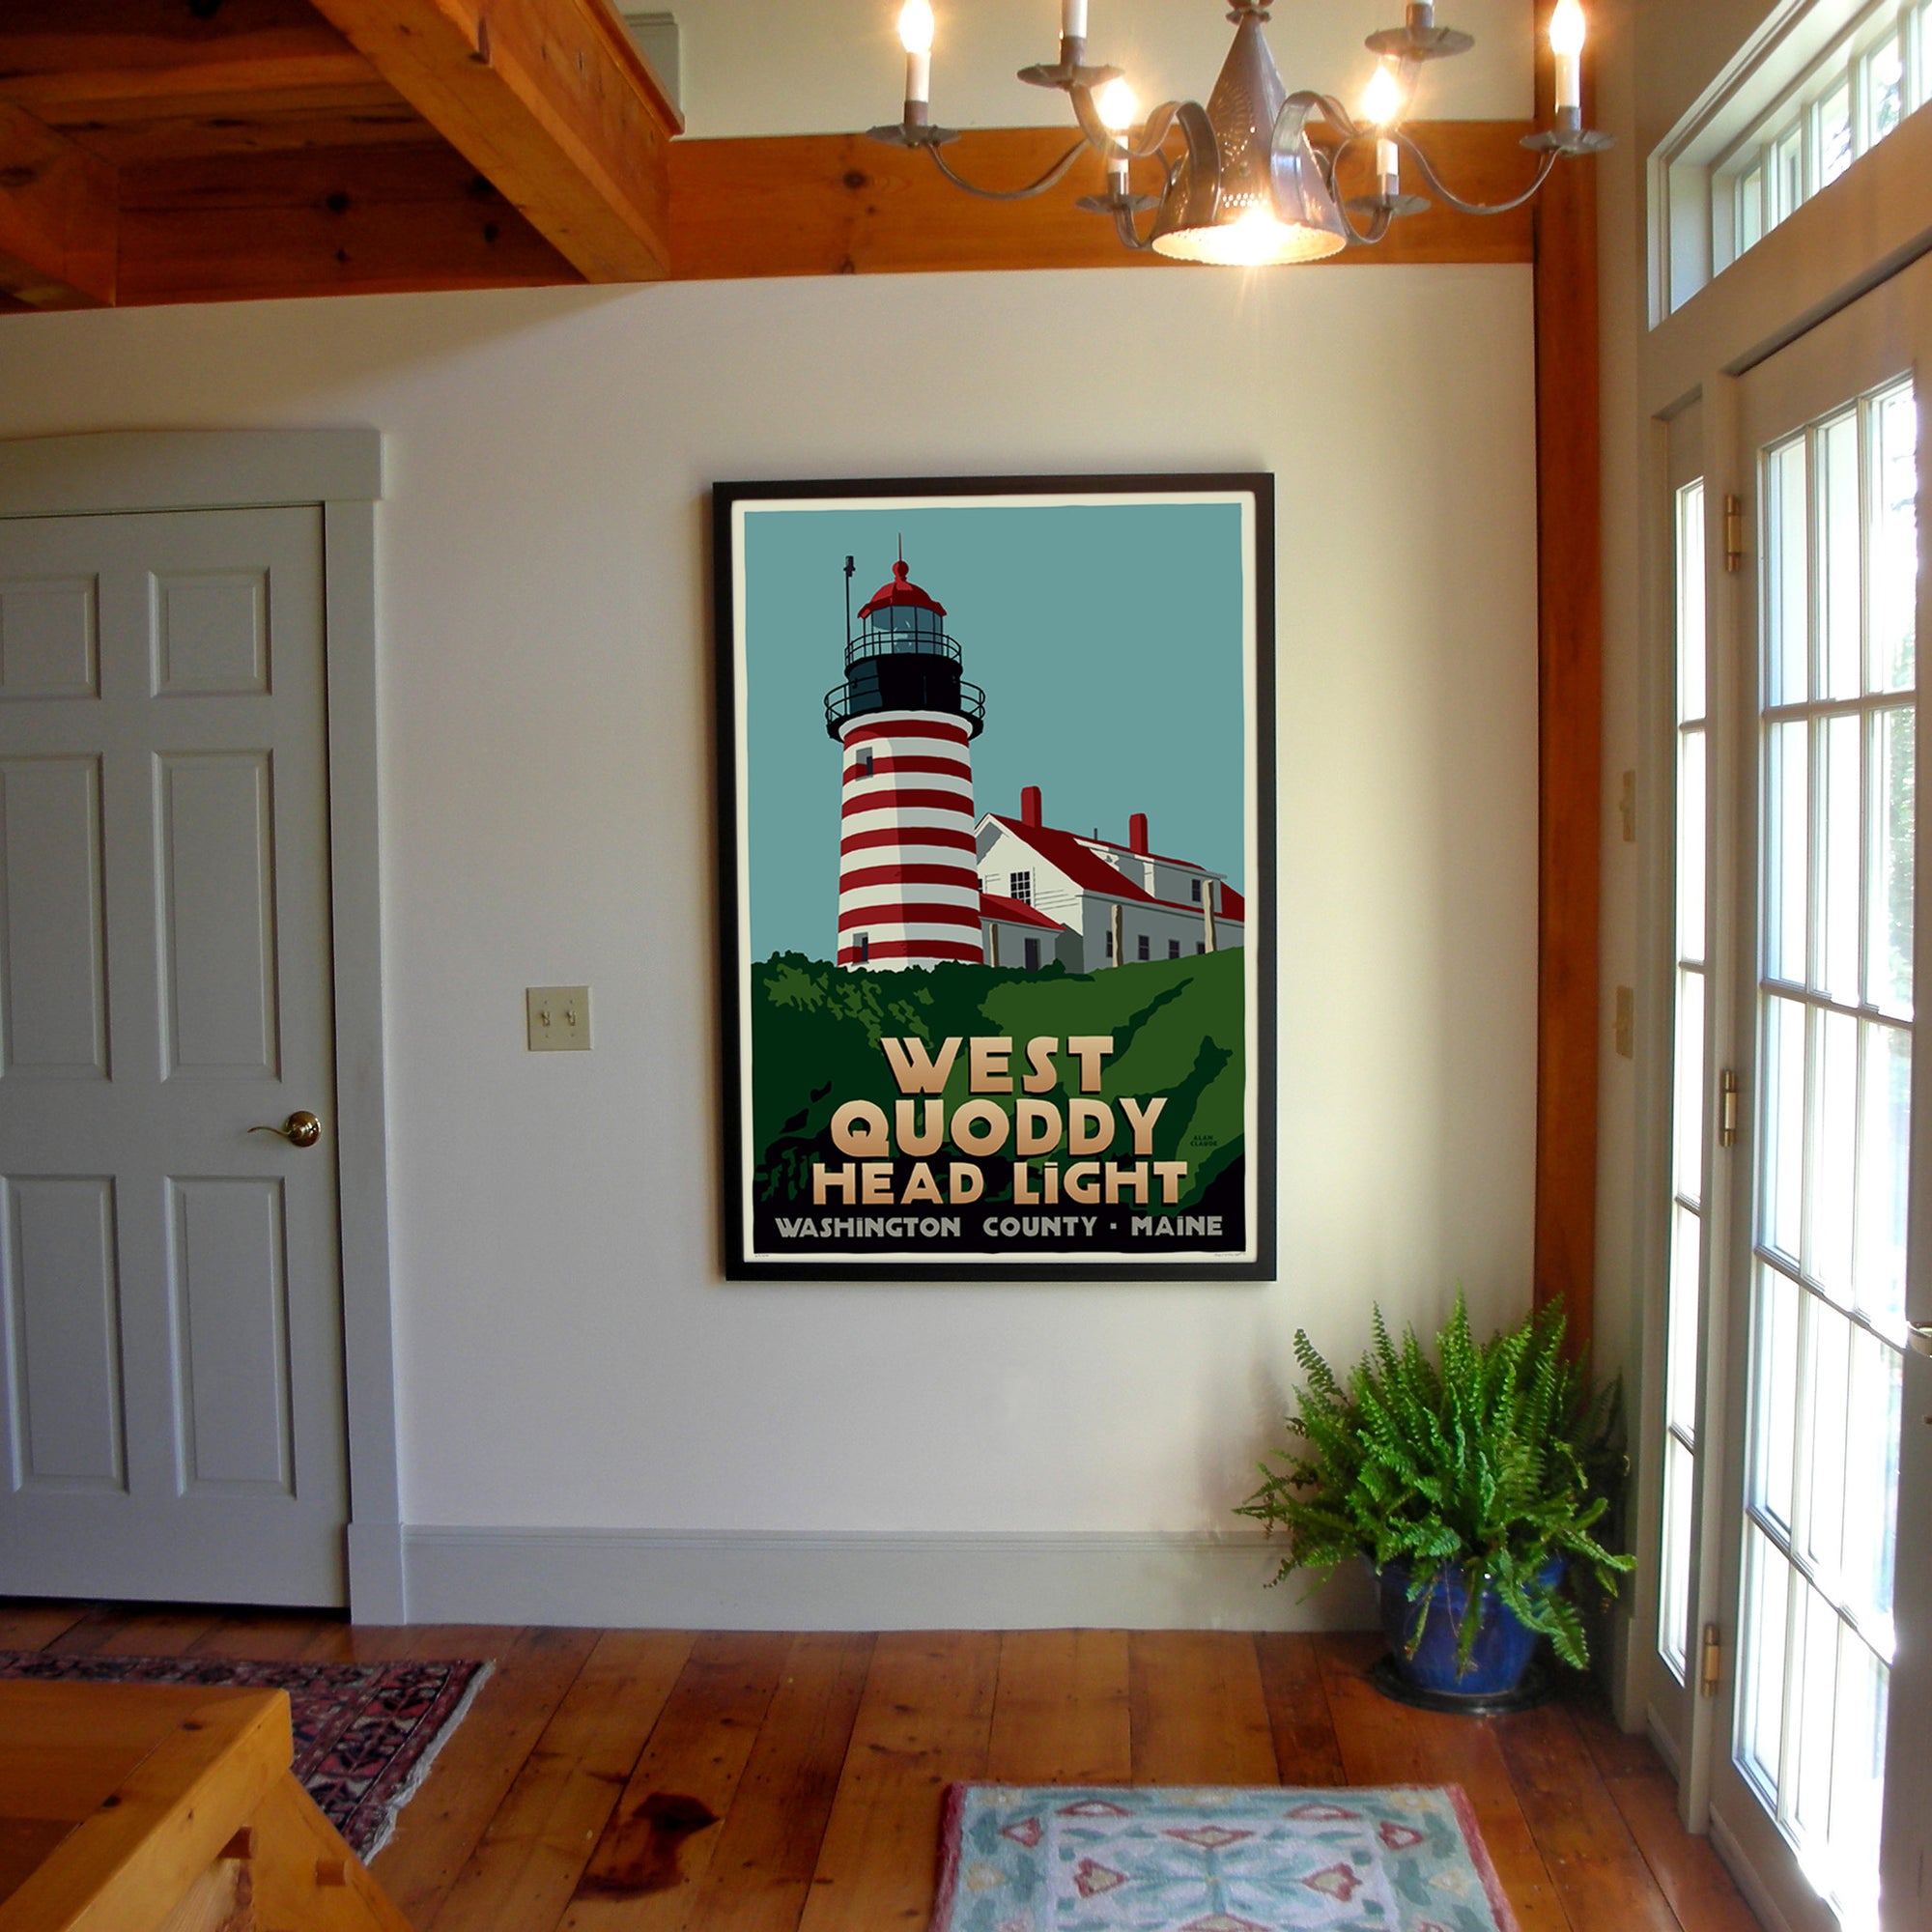 West Quoddy Head Light Art Print 36" x 53" Framed Travel Poster By Alan Claude - Maine